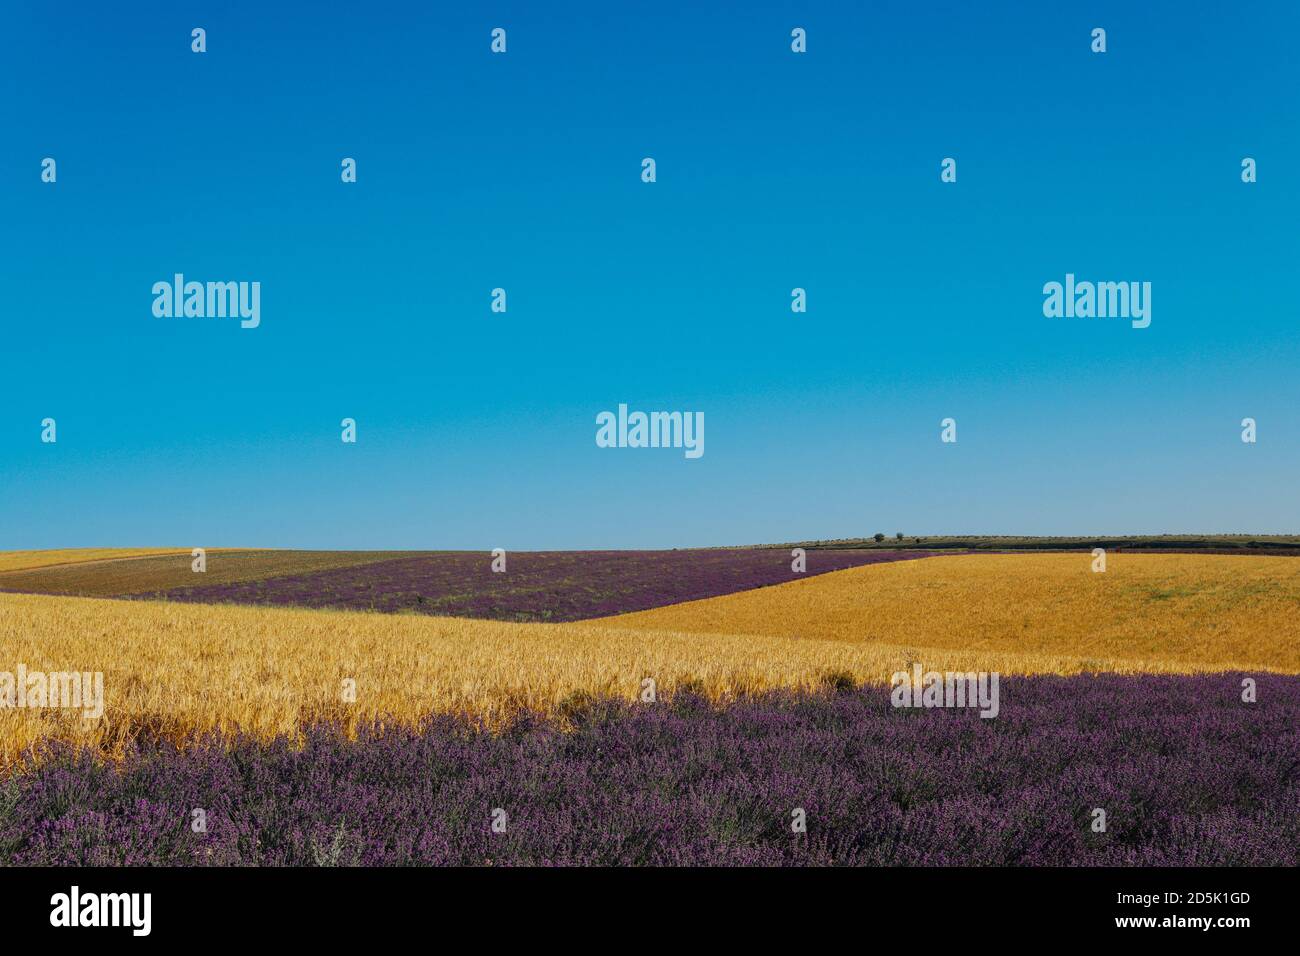 field of fragrant flowers of purple lavender and yellow wheat Provence harvest Stock Photo